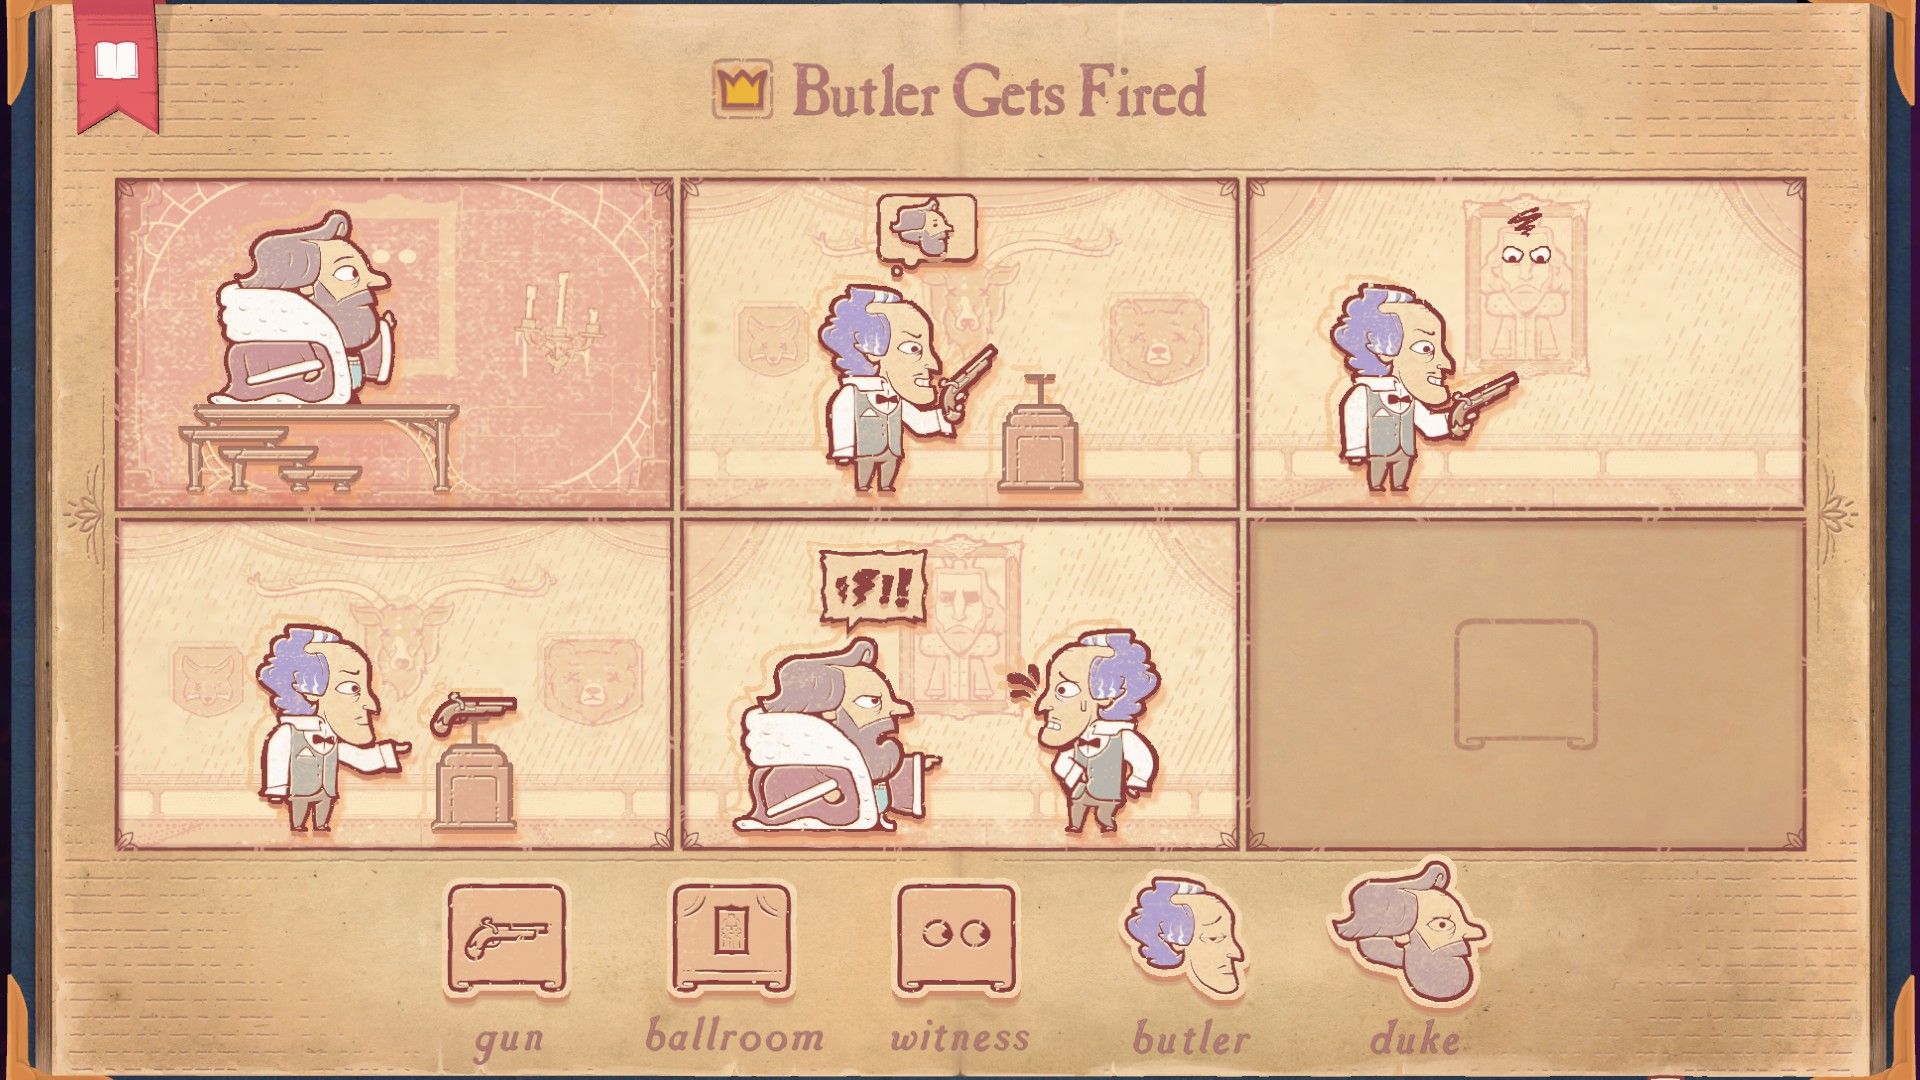 The solution for the Thief section of Storyteller, showing the Butler getting fired.